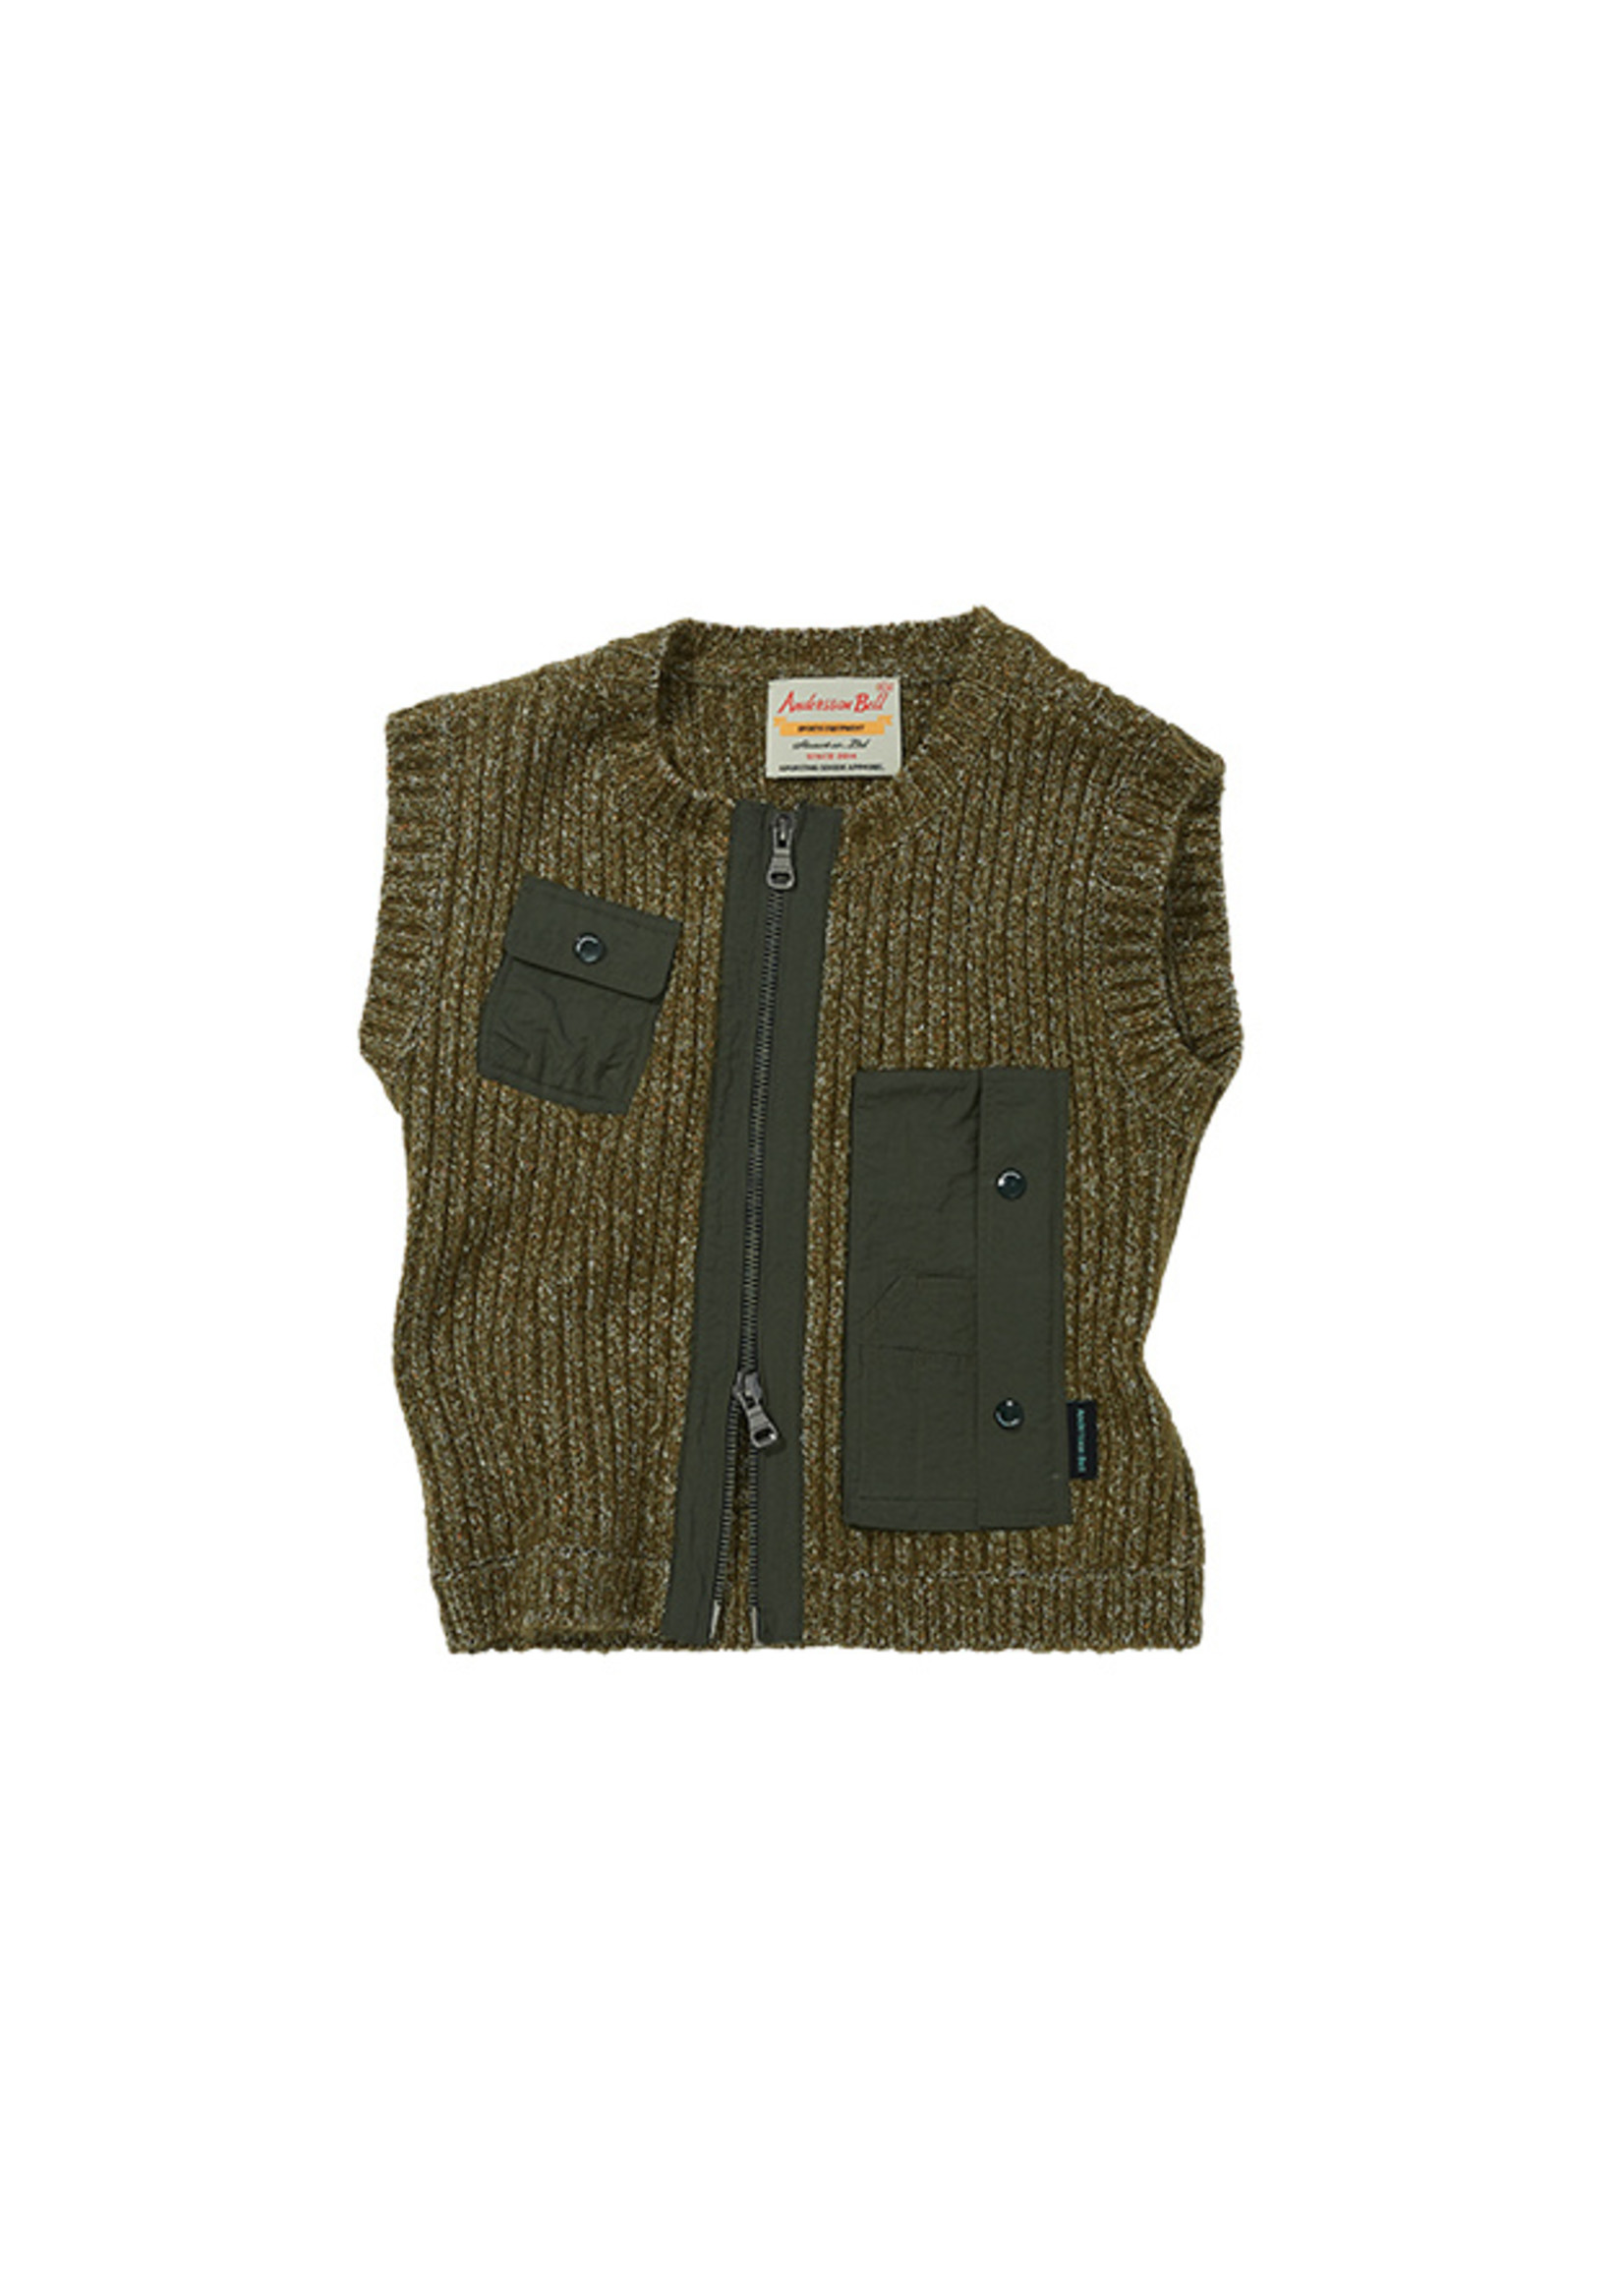 ANDERSSON BELL Women's Military Sweater Vest in Khaki